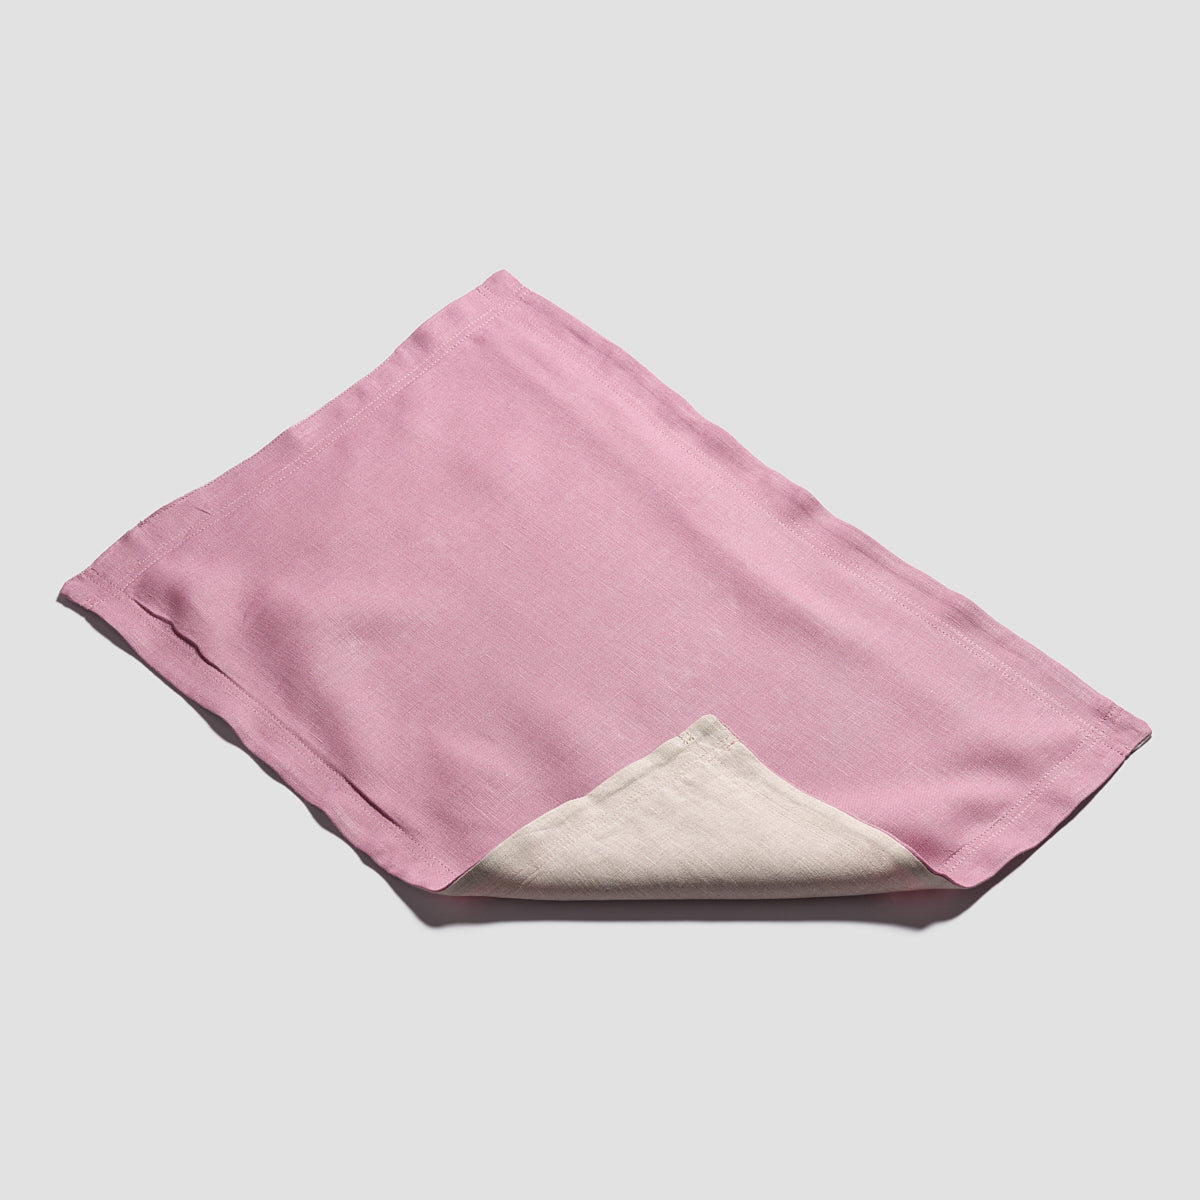 Raspberry Linen Placemat Set - Piglet in Bed